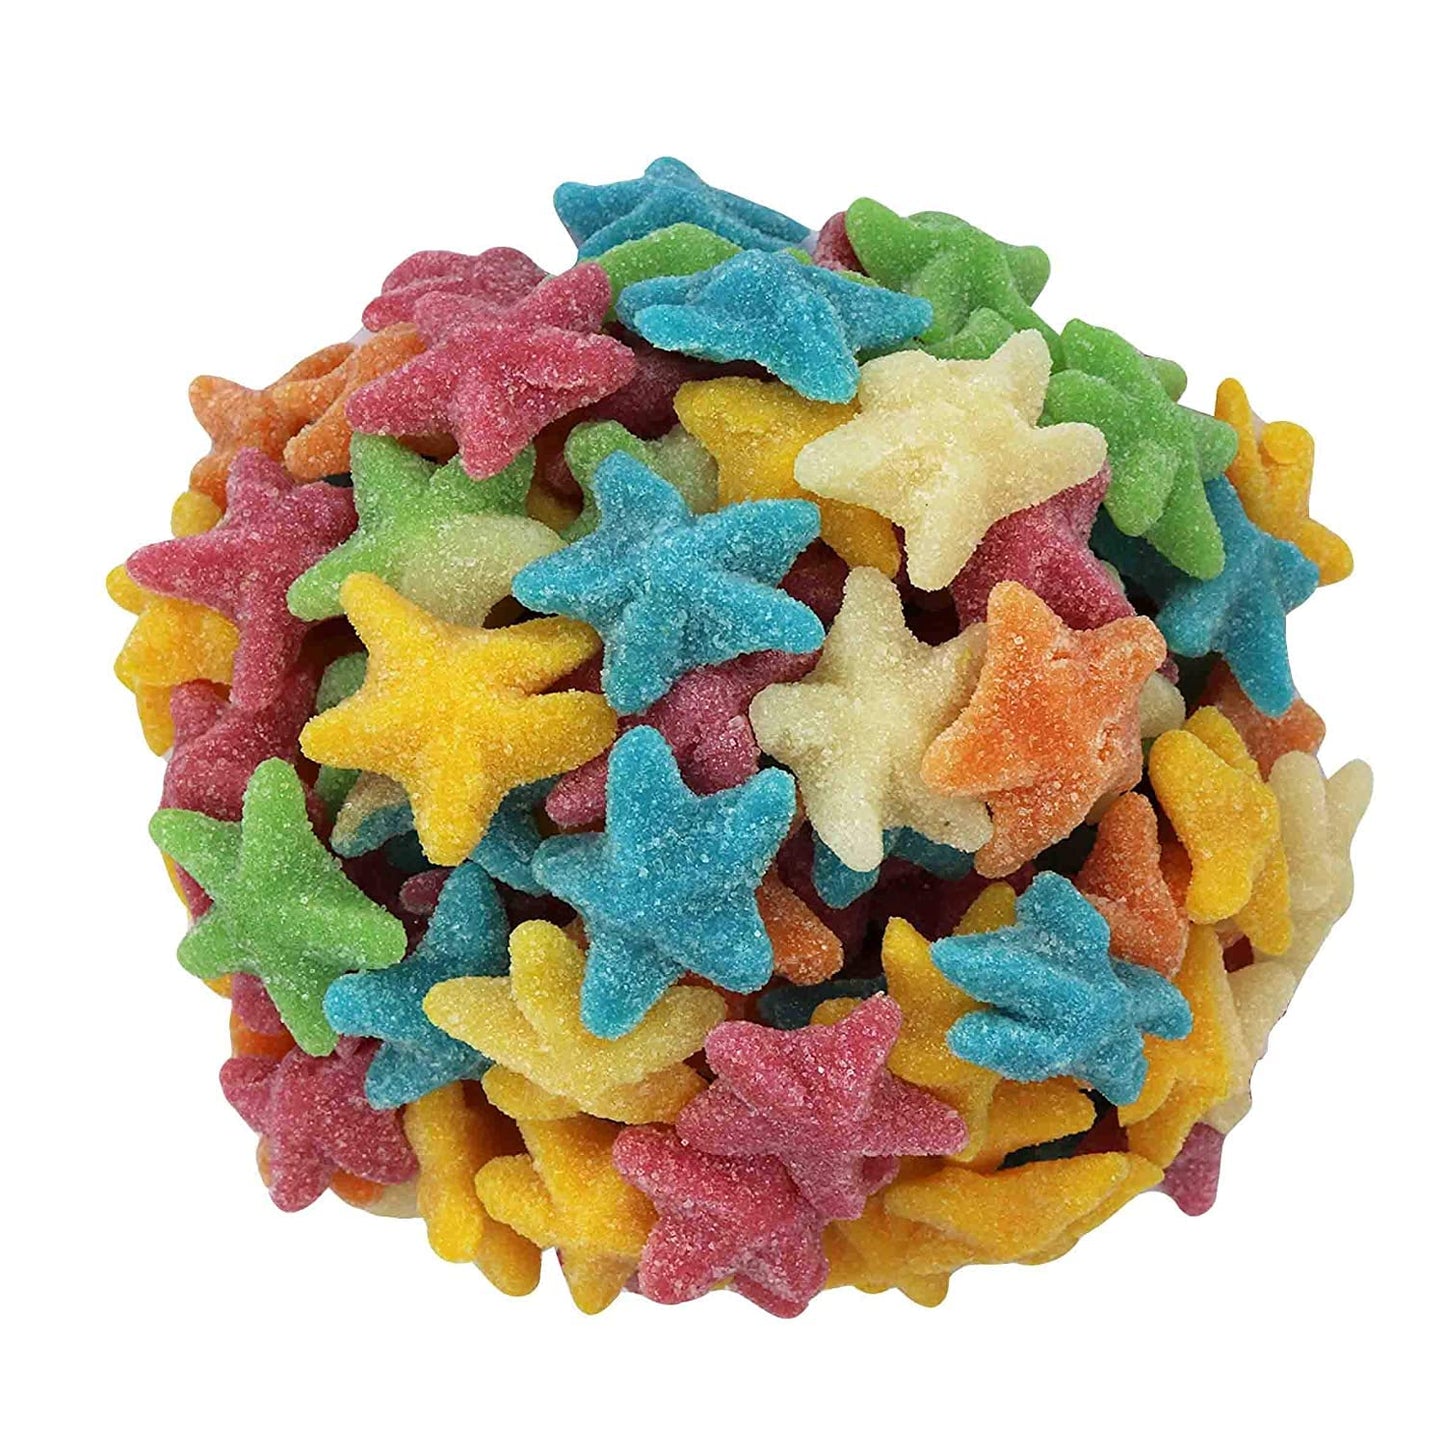 Clever Candy Gummy Starfish